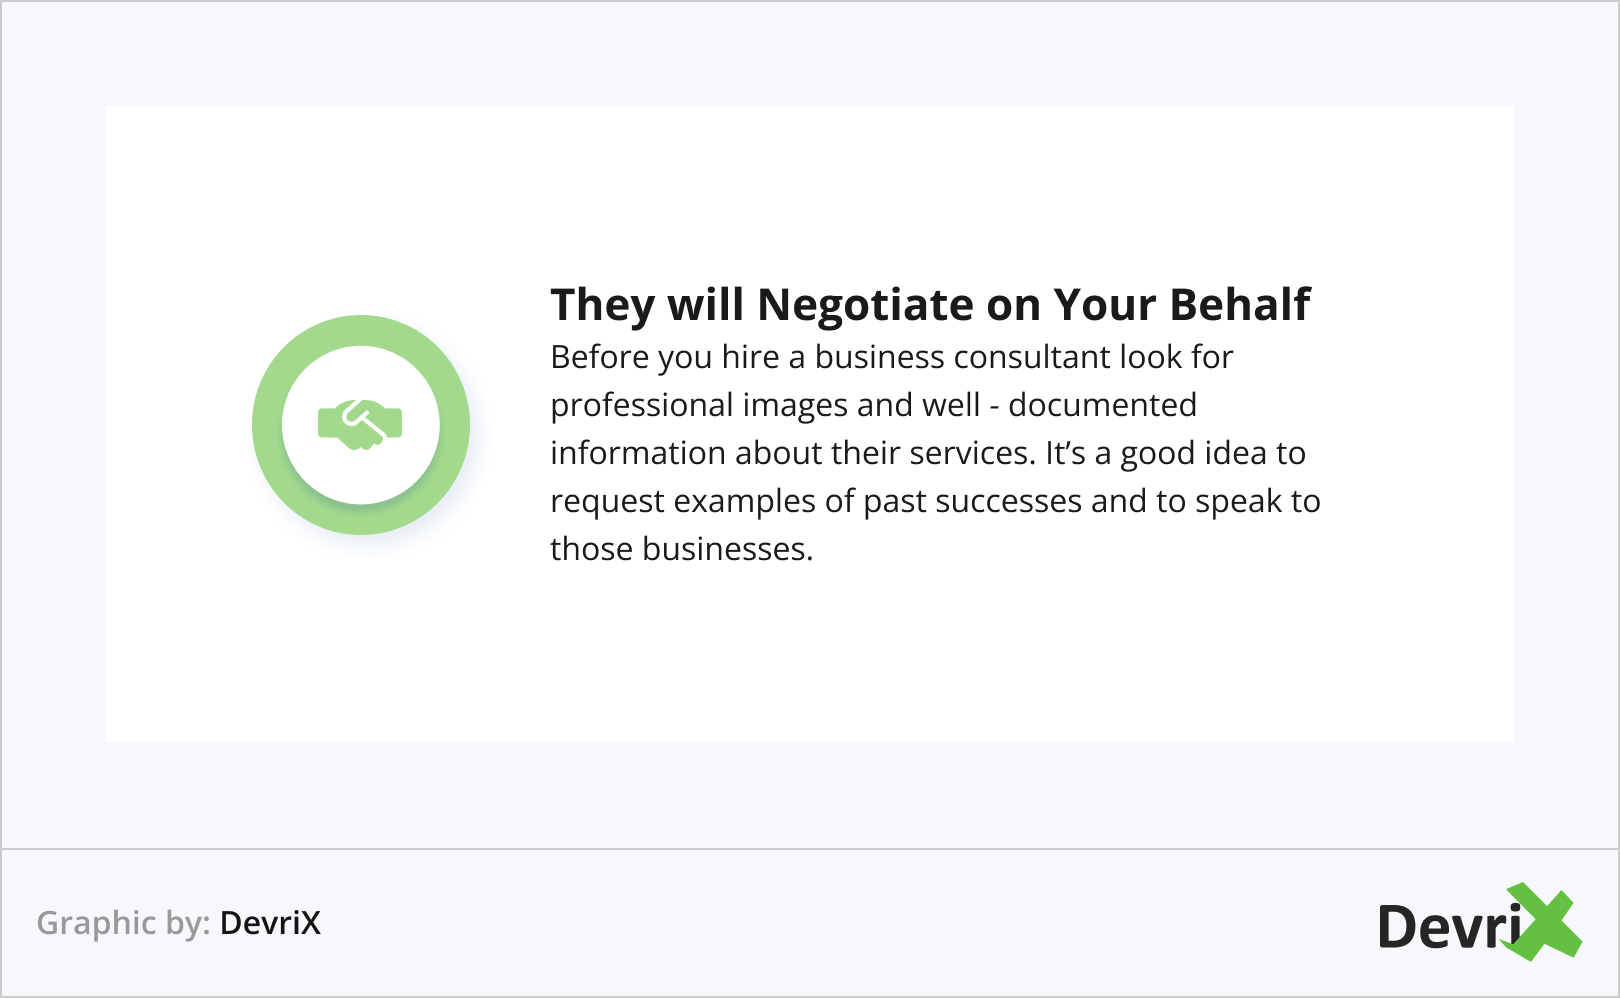 They will Negotiate on Your Behalf